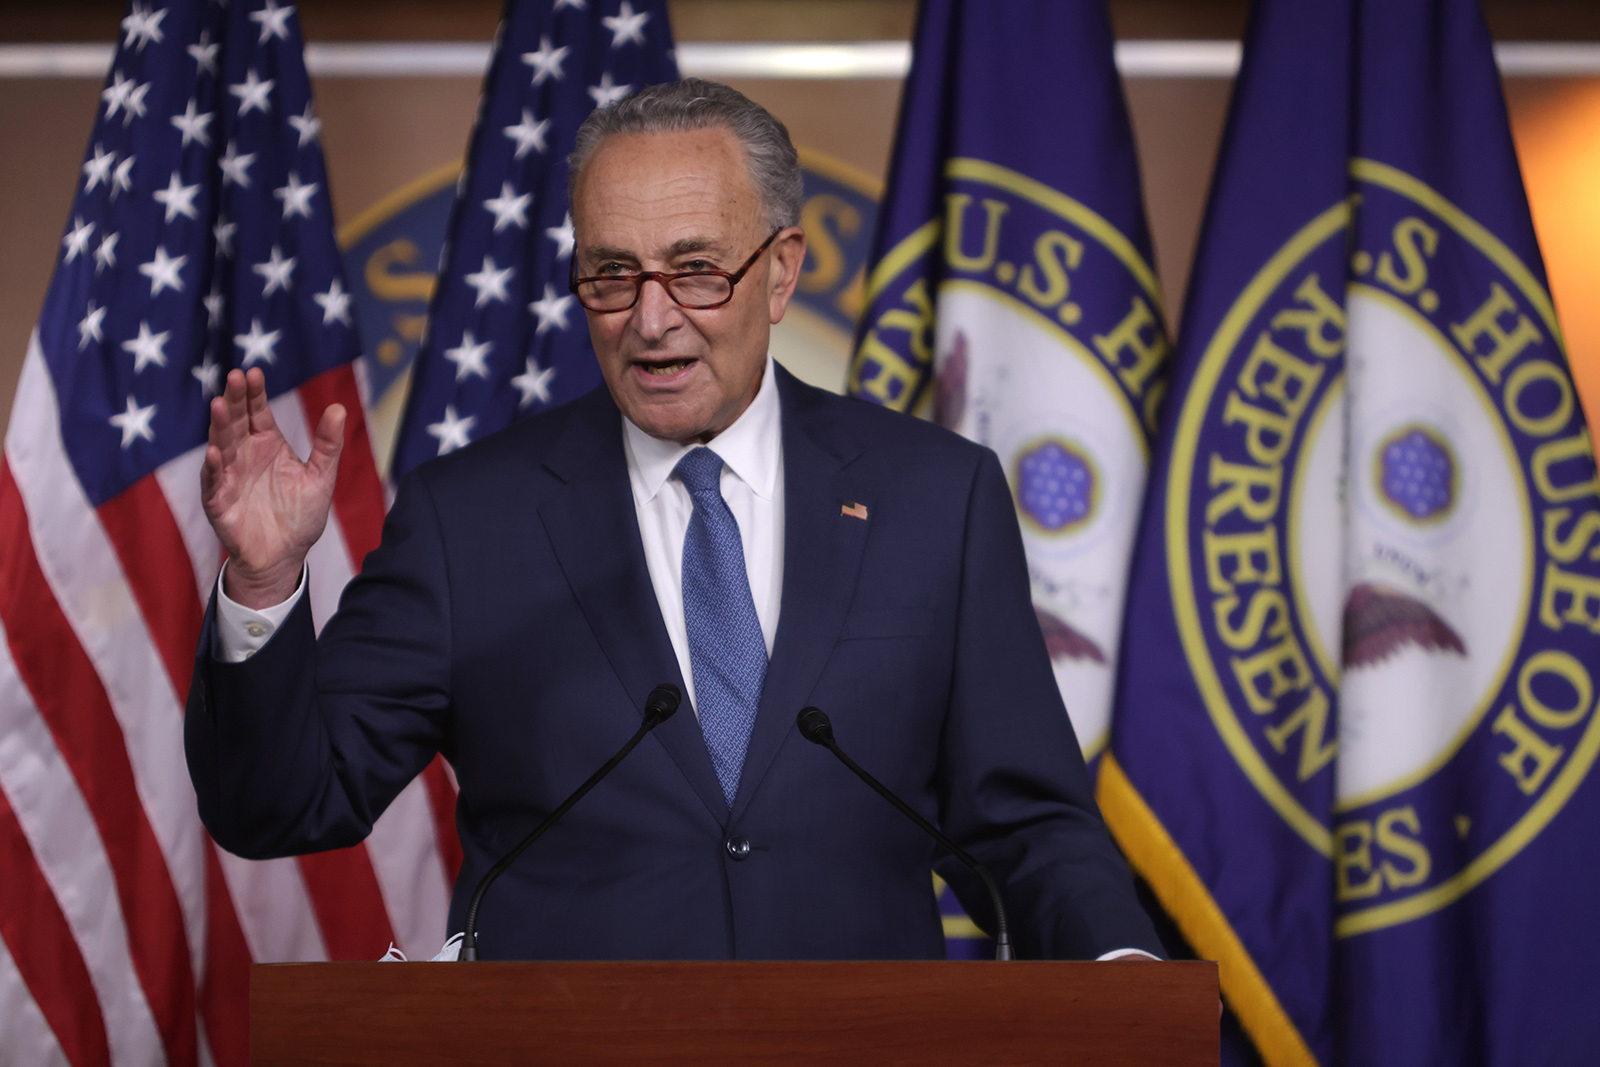 Senate Minority Leader Sen. Chuck Schumer participates in a news conference August 7 on Capitol Hill in Washington.